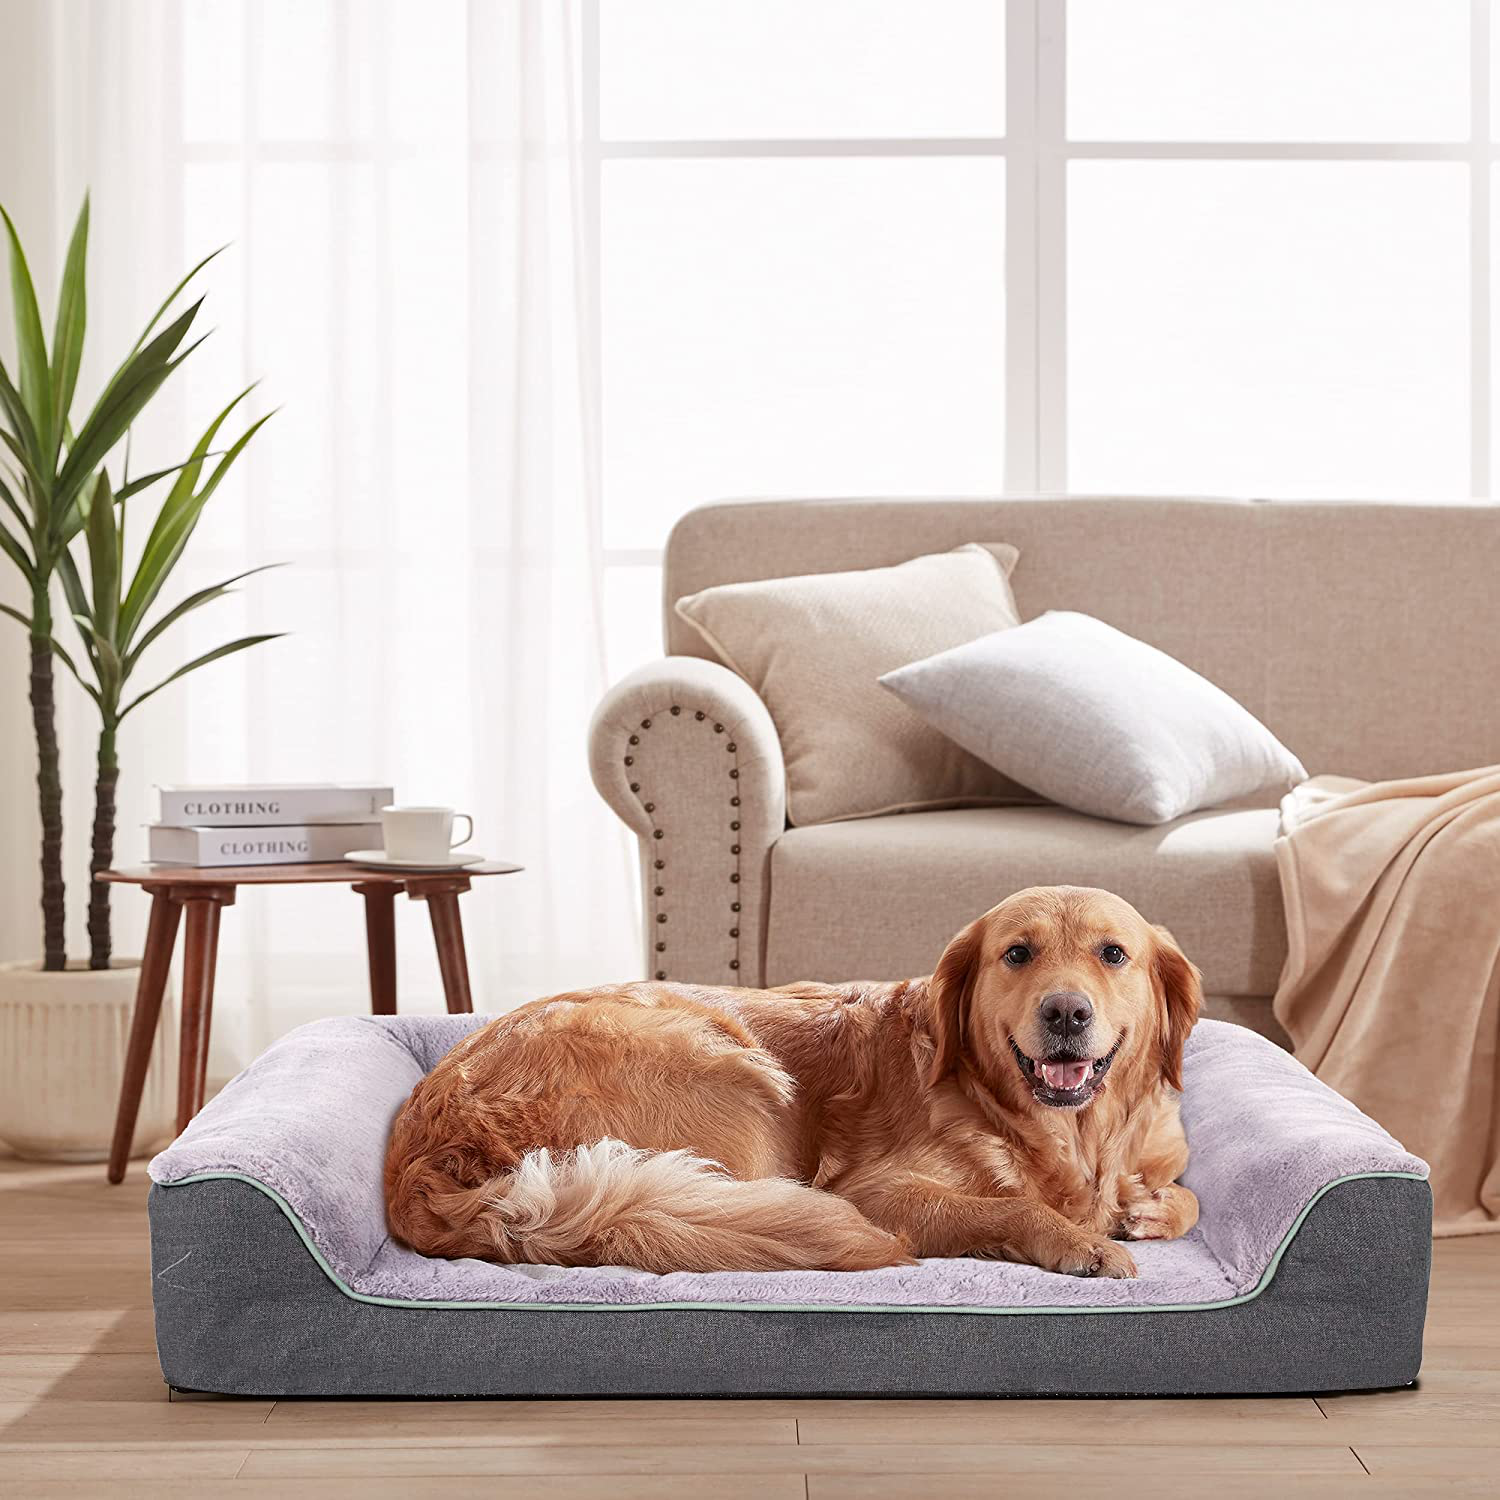 WATANIYA PET Orthopedic Dog Bed - Waterproof Dog Foam Sofa with Removable Washable Cover, Thick Bolster Rim - Couch Dog Bed for Small Medium Large Dogs Animals & Pet Supplies > Pet Supplies > Dog Supplies > Dog Beds Shenzhen lechen times Culture Communication Co., L   